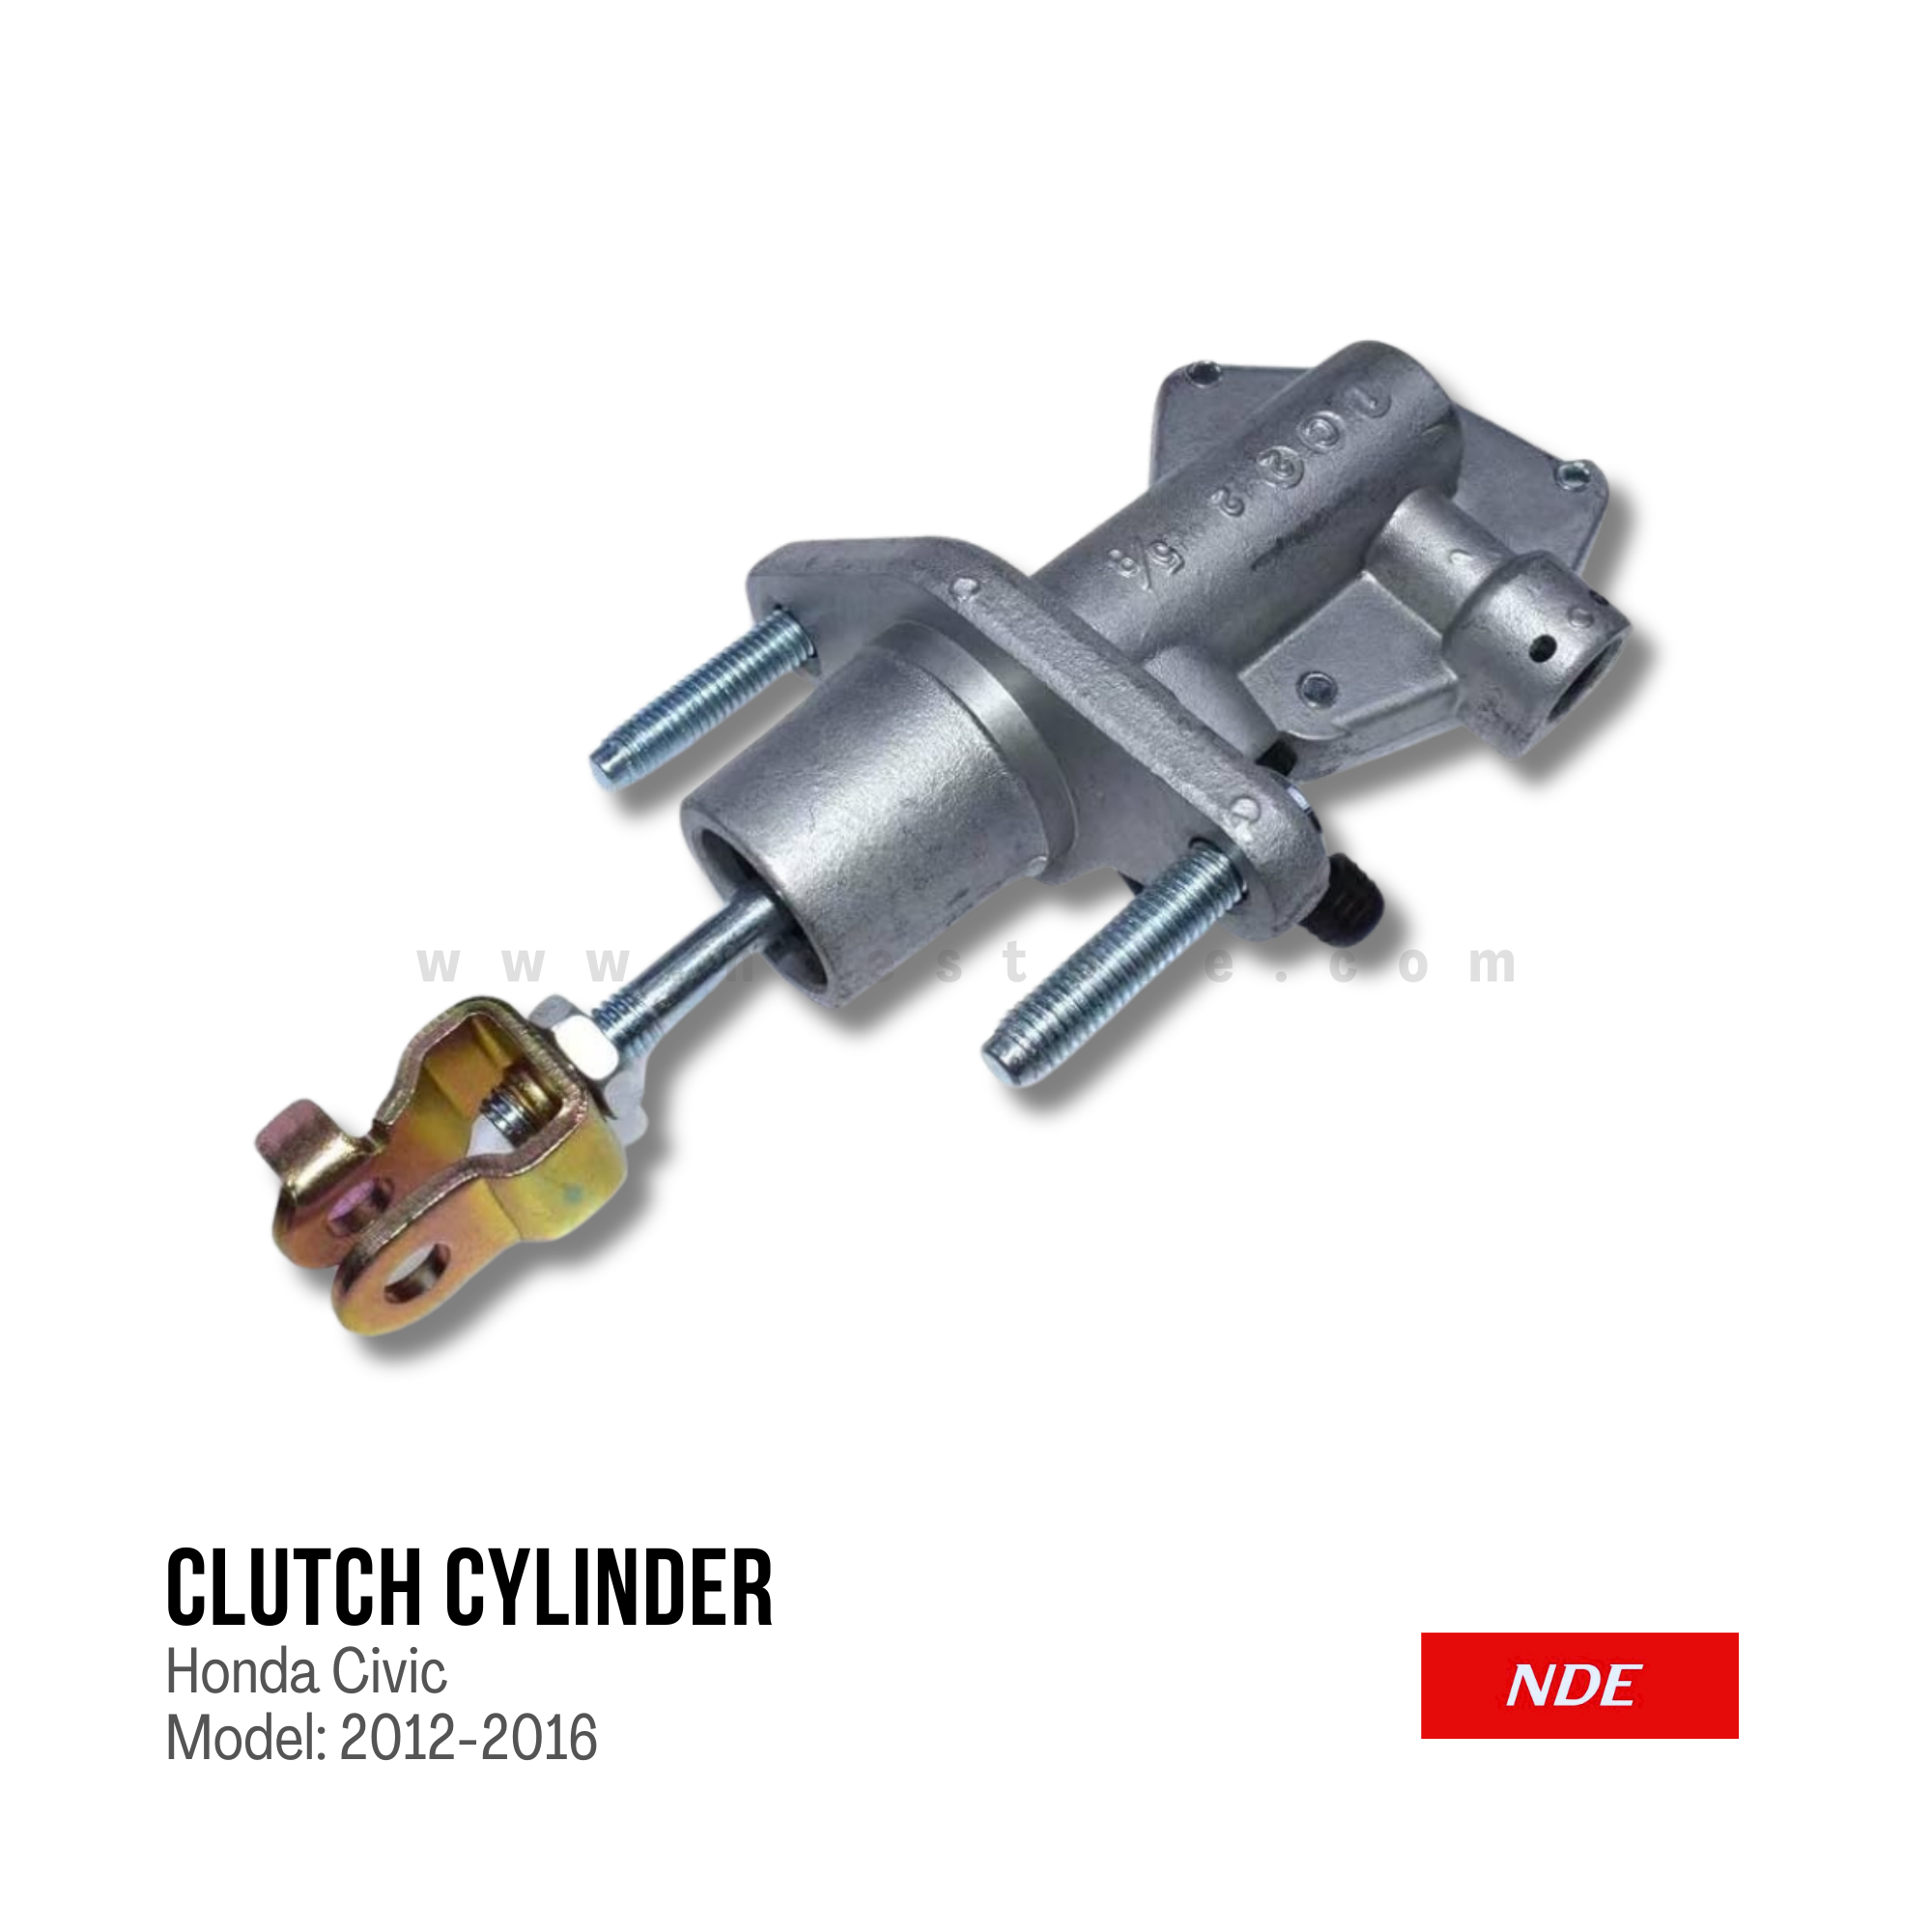 CLUTCH CYLINDER ASSY FOR HONDA CIVIC (2006-2012)